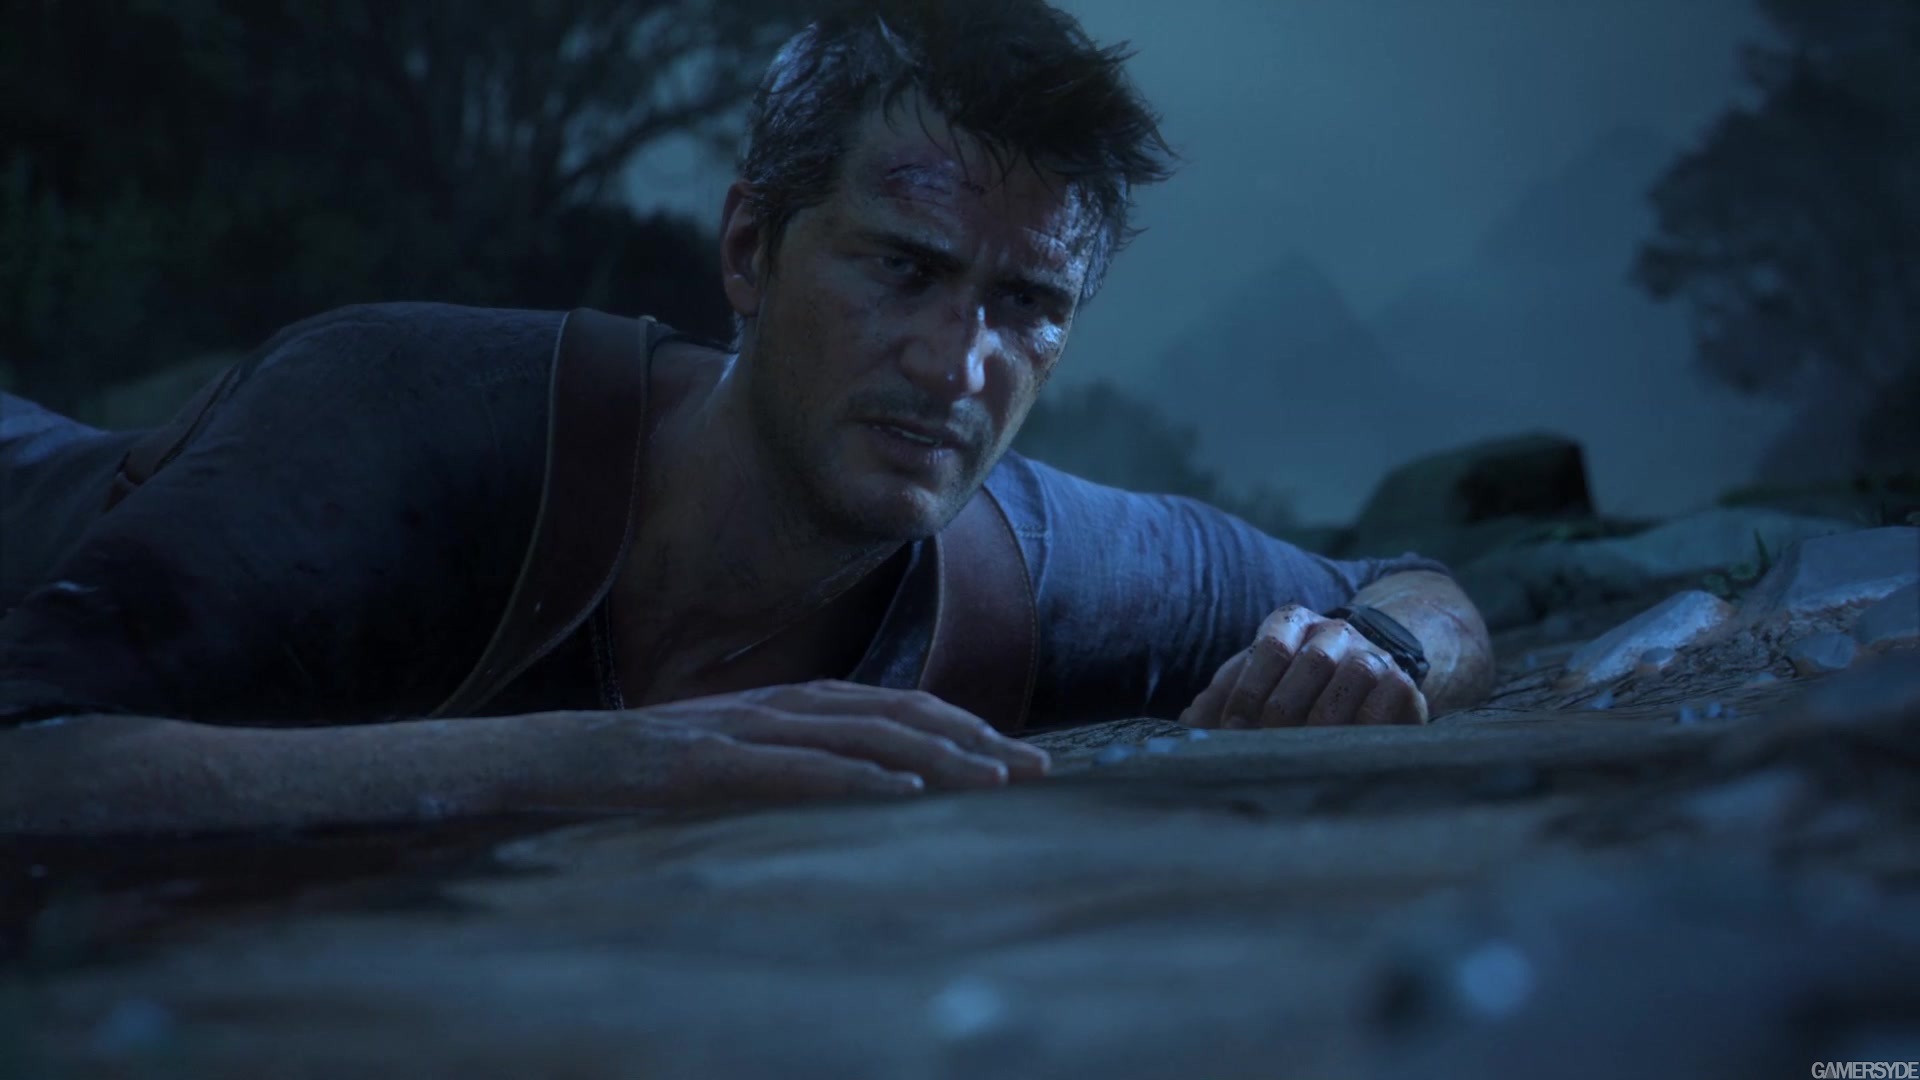 image_uncharted_4_a_thief_s_end-25336-2995_0002.jpg